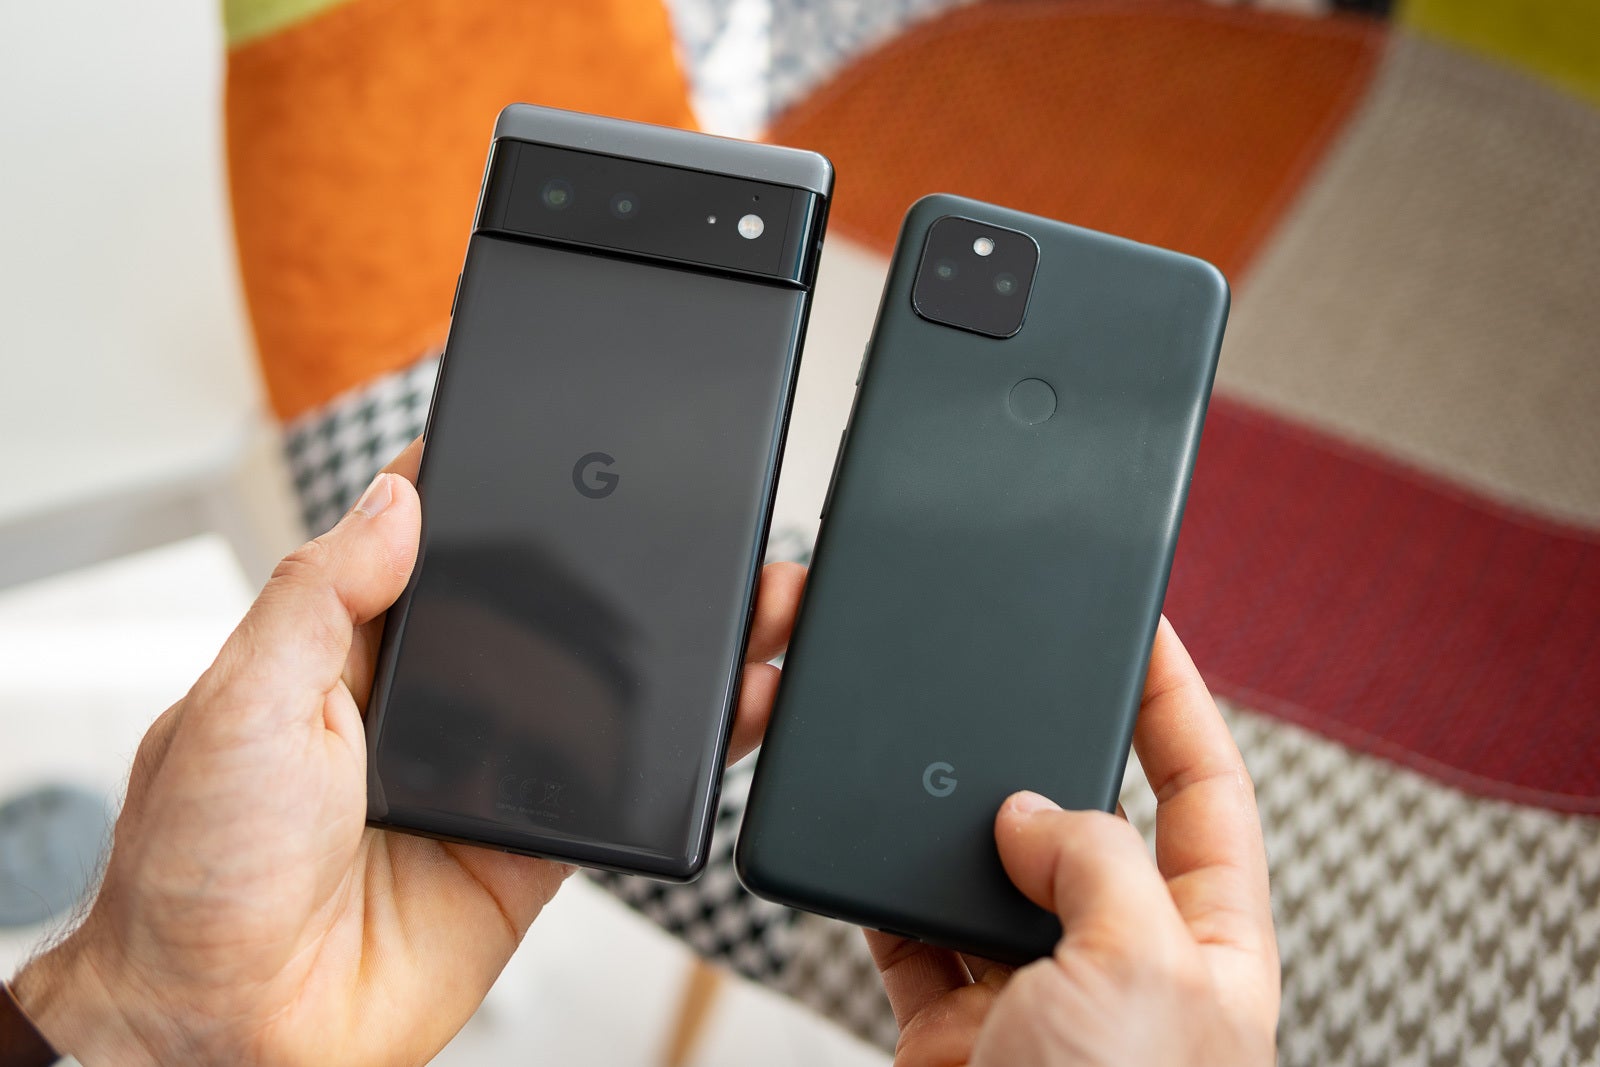 Did you break your Pixel? If so, we hope you&#039;ve put a password on it - Google is investigating reports of Pixel repairs resulting in leaked photos